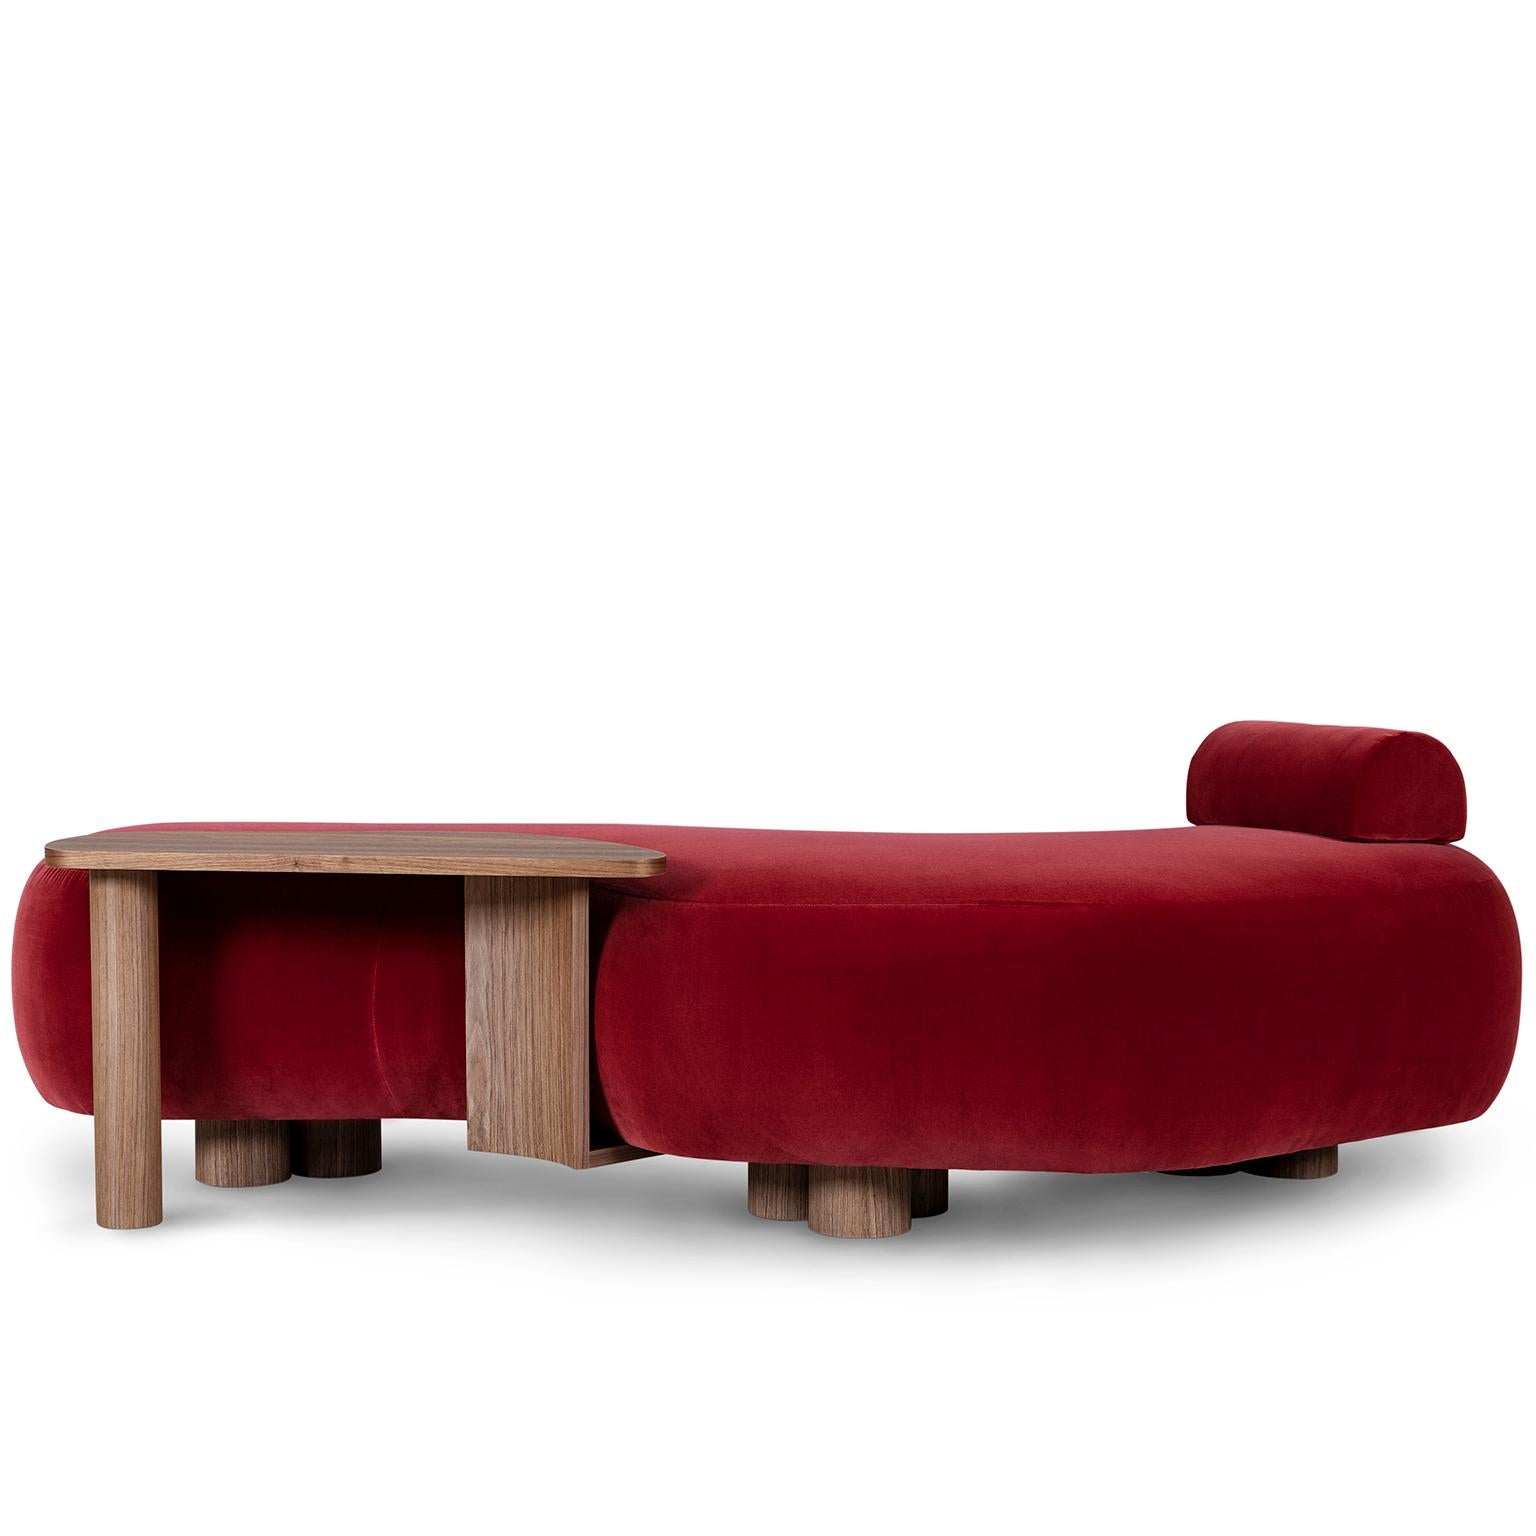 Minho Chaise Lounge, Contemporary Collection, Handcrafted in Portugal - Europe by Greenapple.

Designed by Rute Martins for the Contemporary Collection, the Minho chaise lounge with a wooden side table is a modern interpretation of the traditional